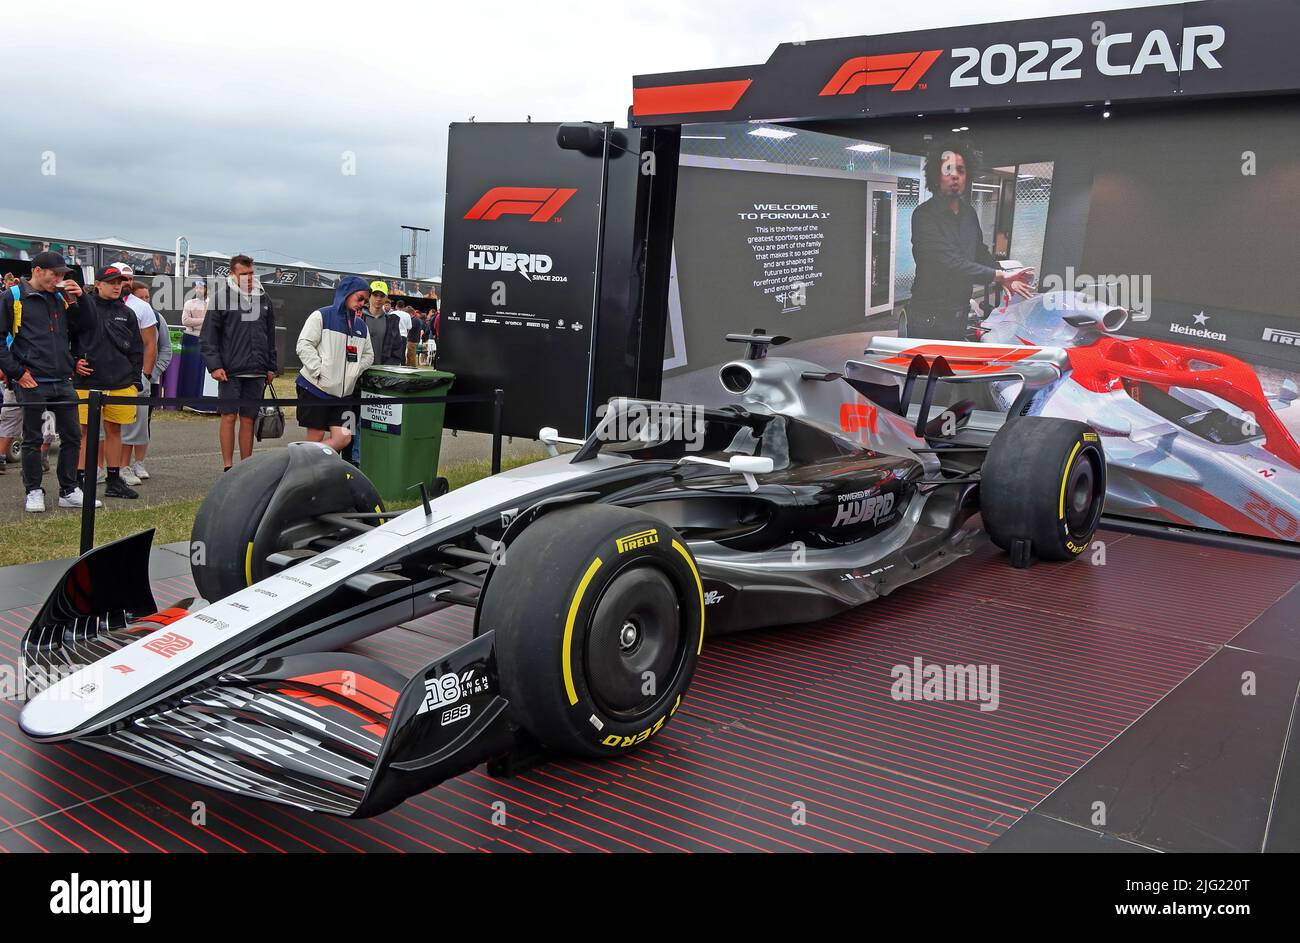 2022 F1 Hybrid Car, E10 Ethanol, synthetic gasoline 10% biofuel fuelled racing vehicle, Silverstone Circuit, Towcester,England,UK,NN12 8TL Stock Photo